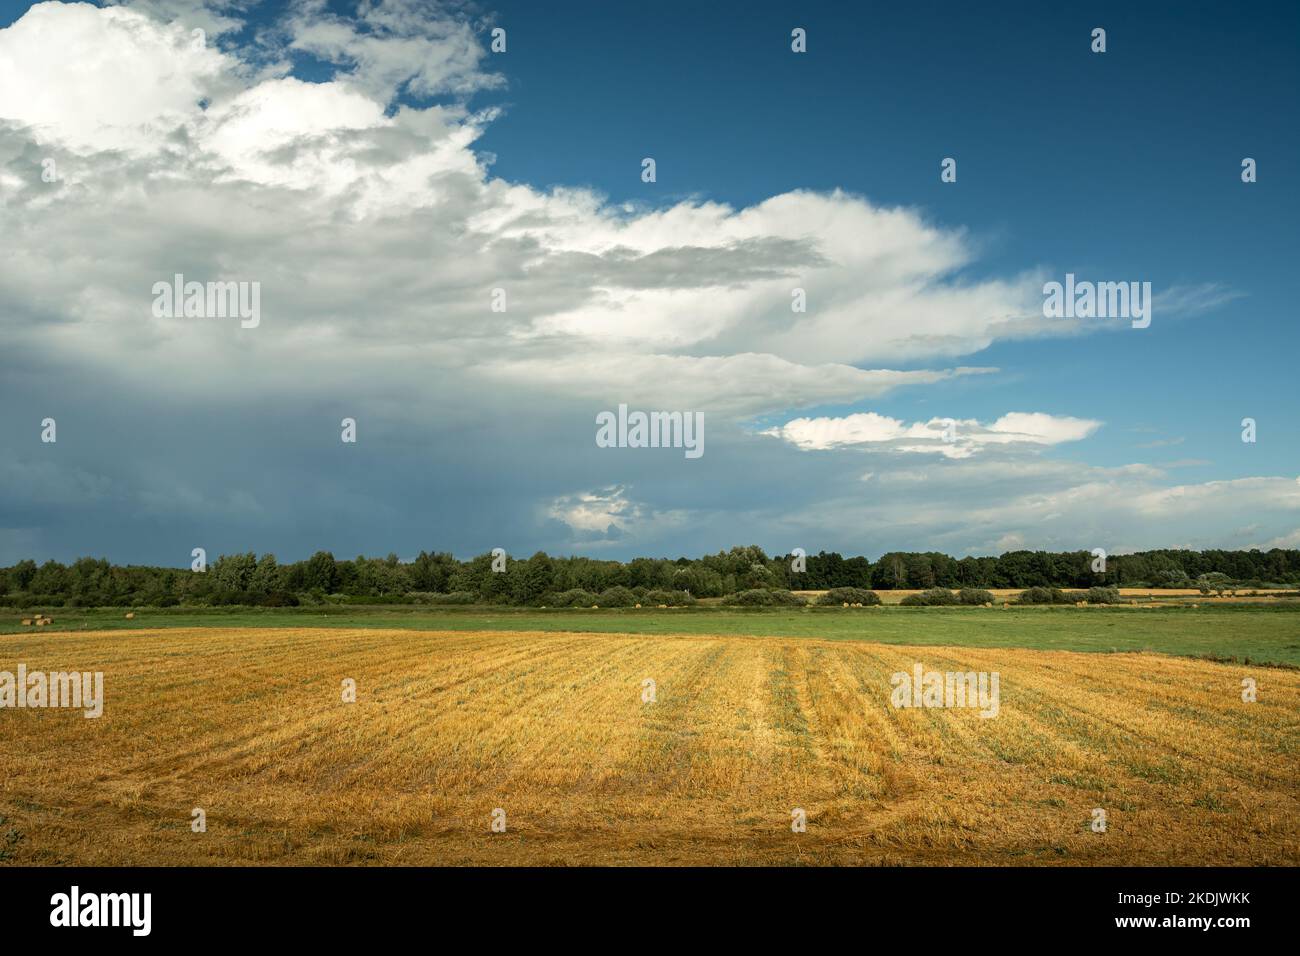 Stubble field and forest on the horizon, stormy clouds on the sky, Czulczyce, Poland Stock Photo